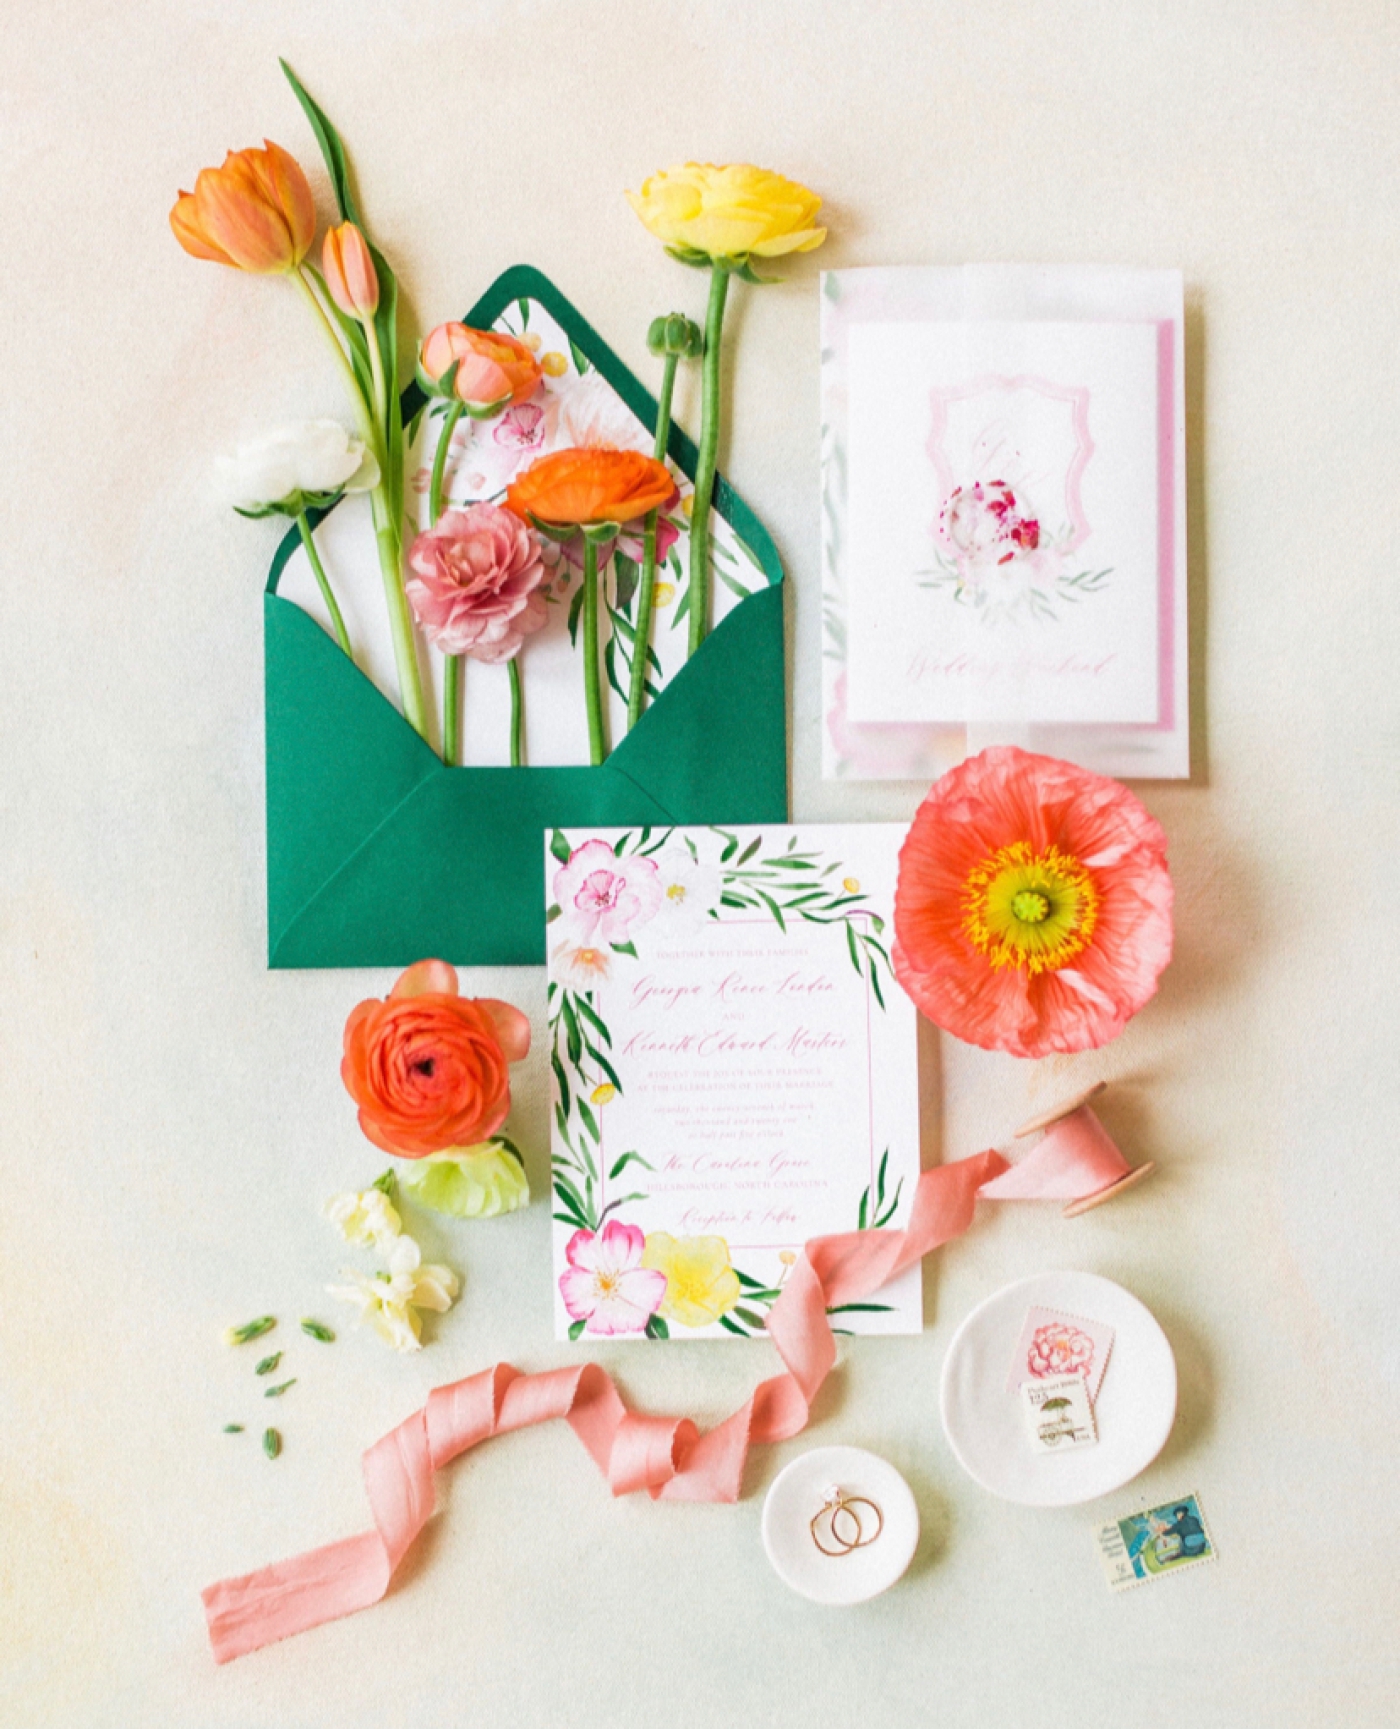 How to customize your wedding invitations